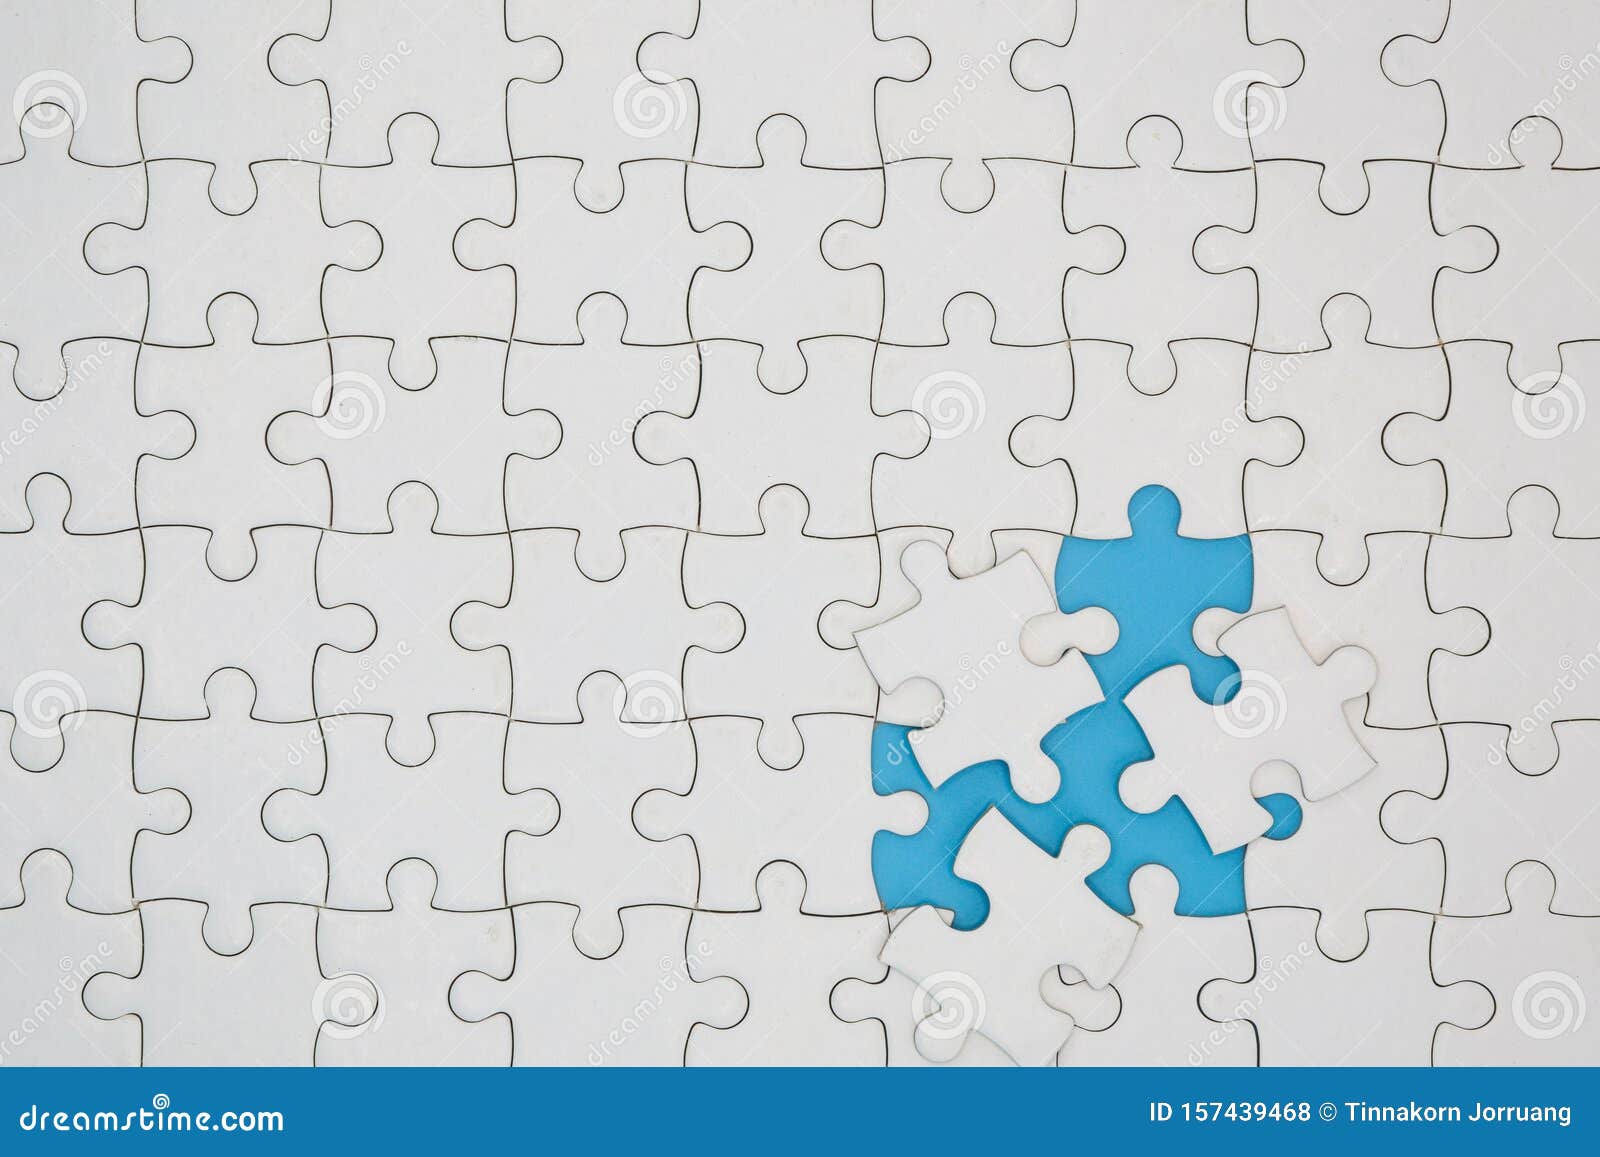 unfinished white jigsaw puzzle pieces on blue background, the last piece of jigsaw puzzle, copy space